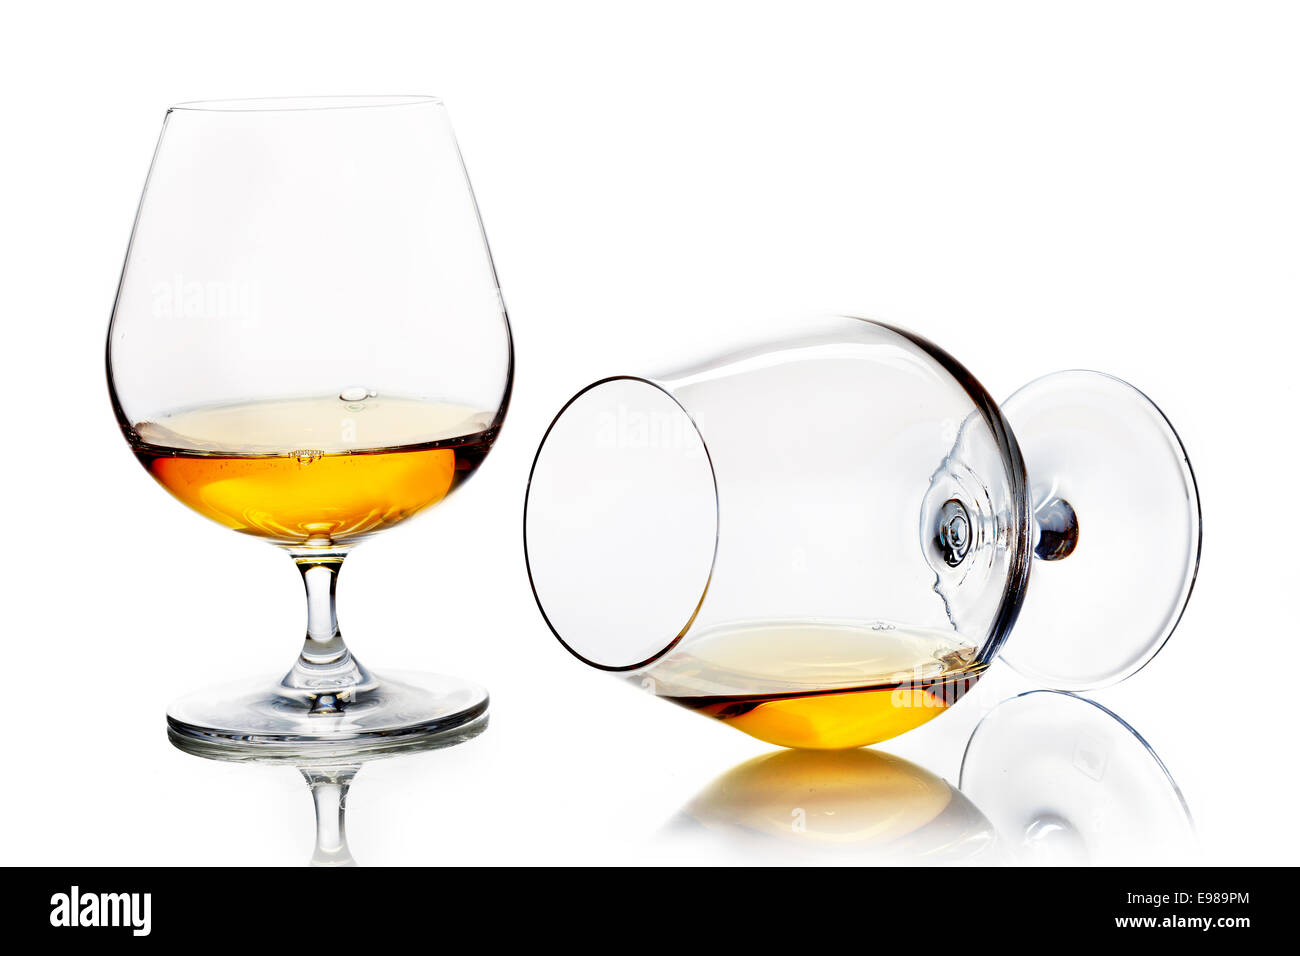 Snifters with brandy or cognac, one standing upright and one angled towards the camera lying on its side on a white studio background Stock Photo